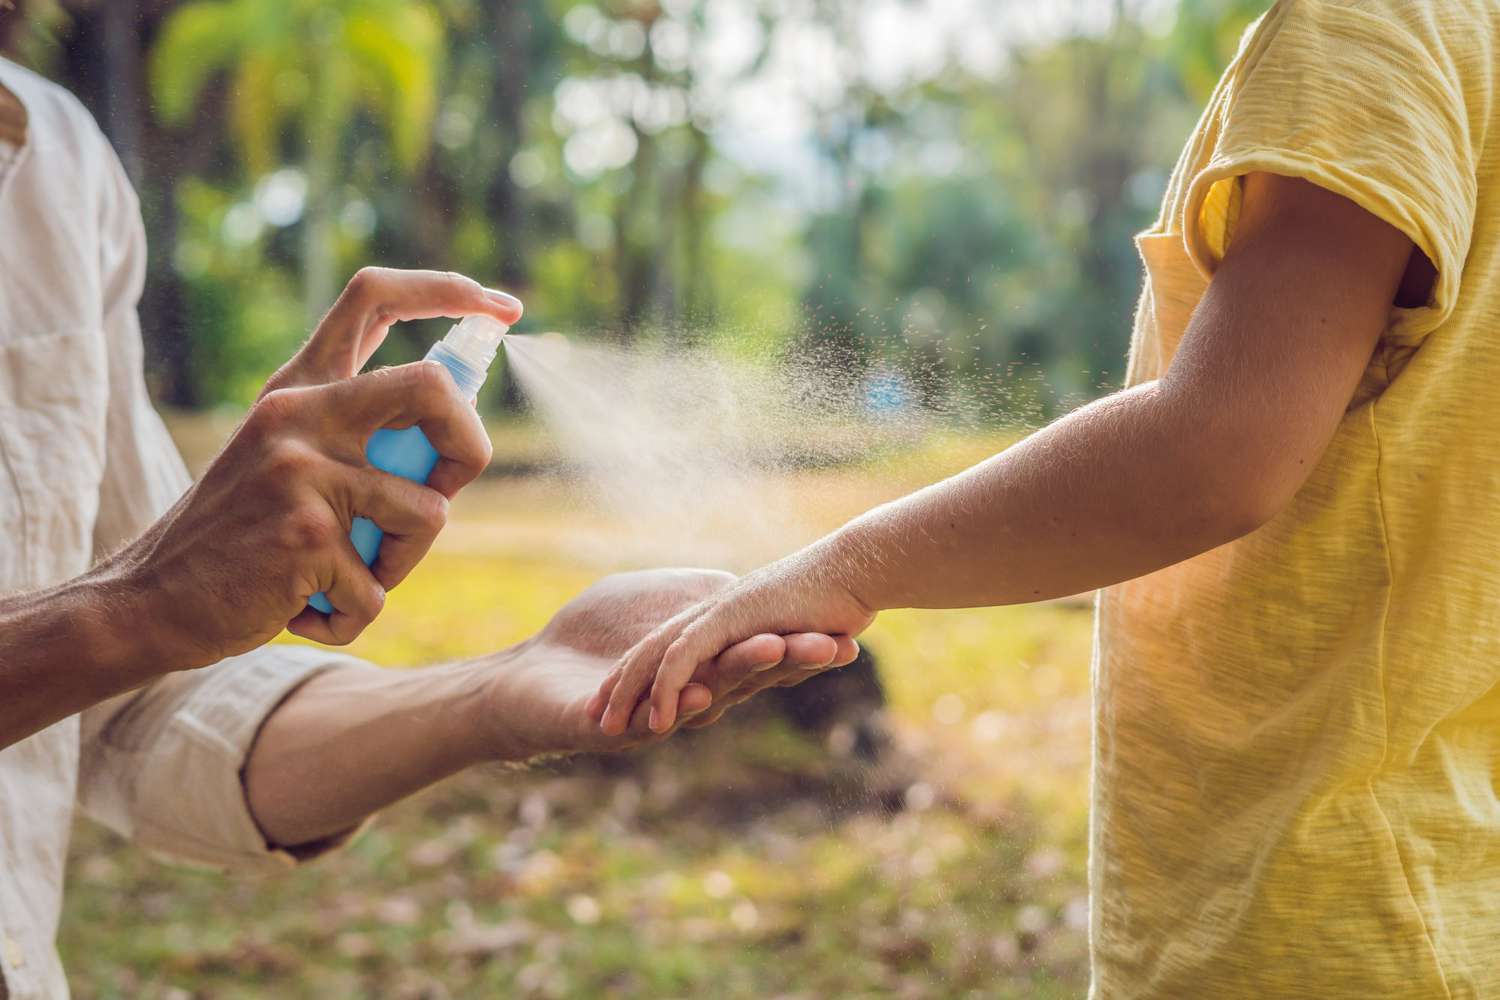 mother spraying bug spray on child's arms outdoors